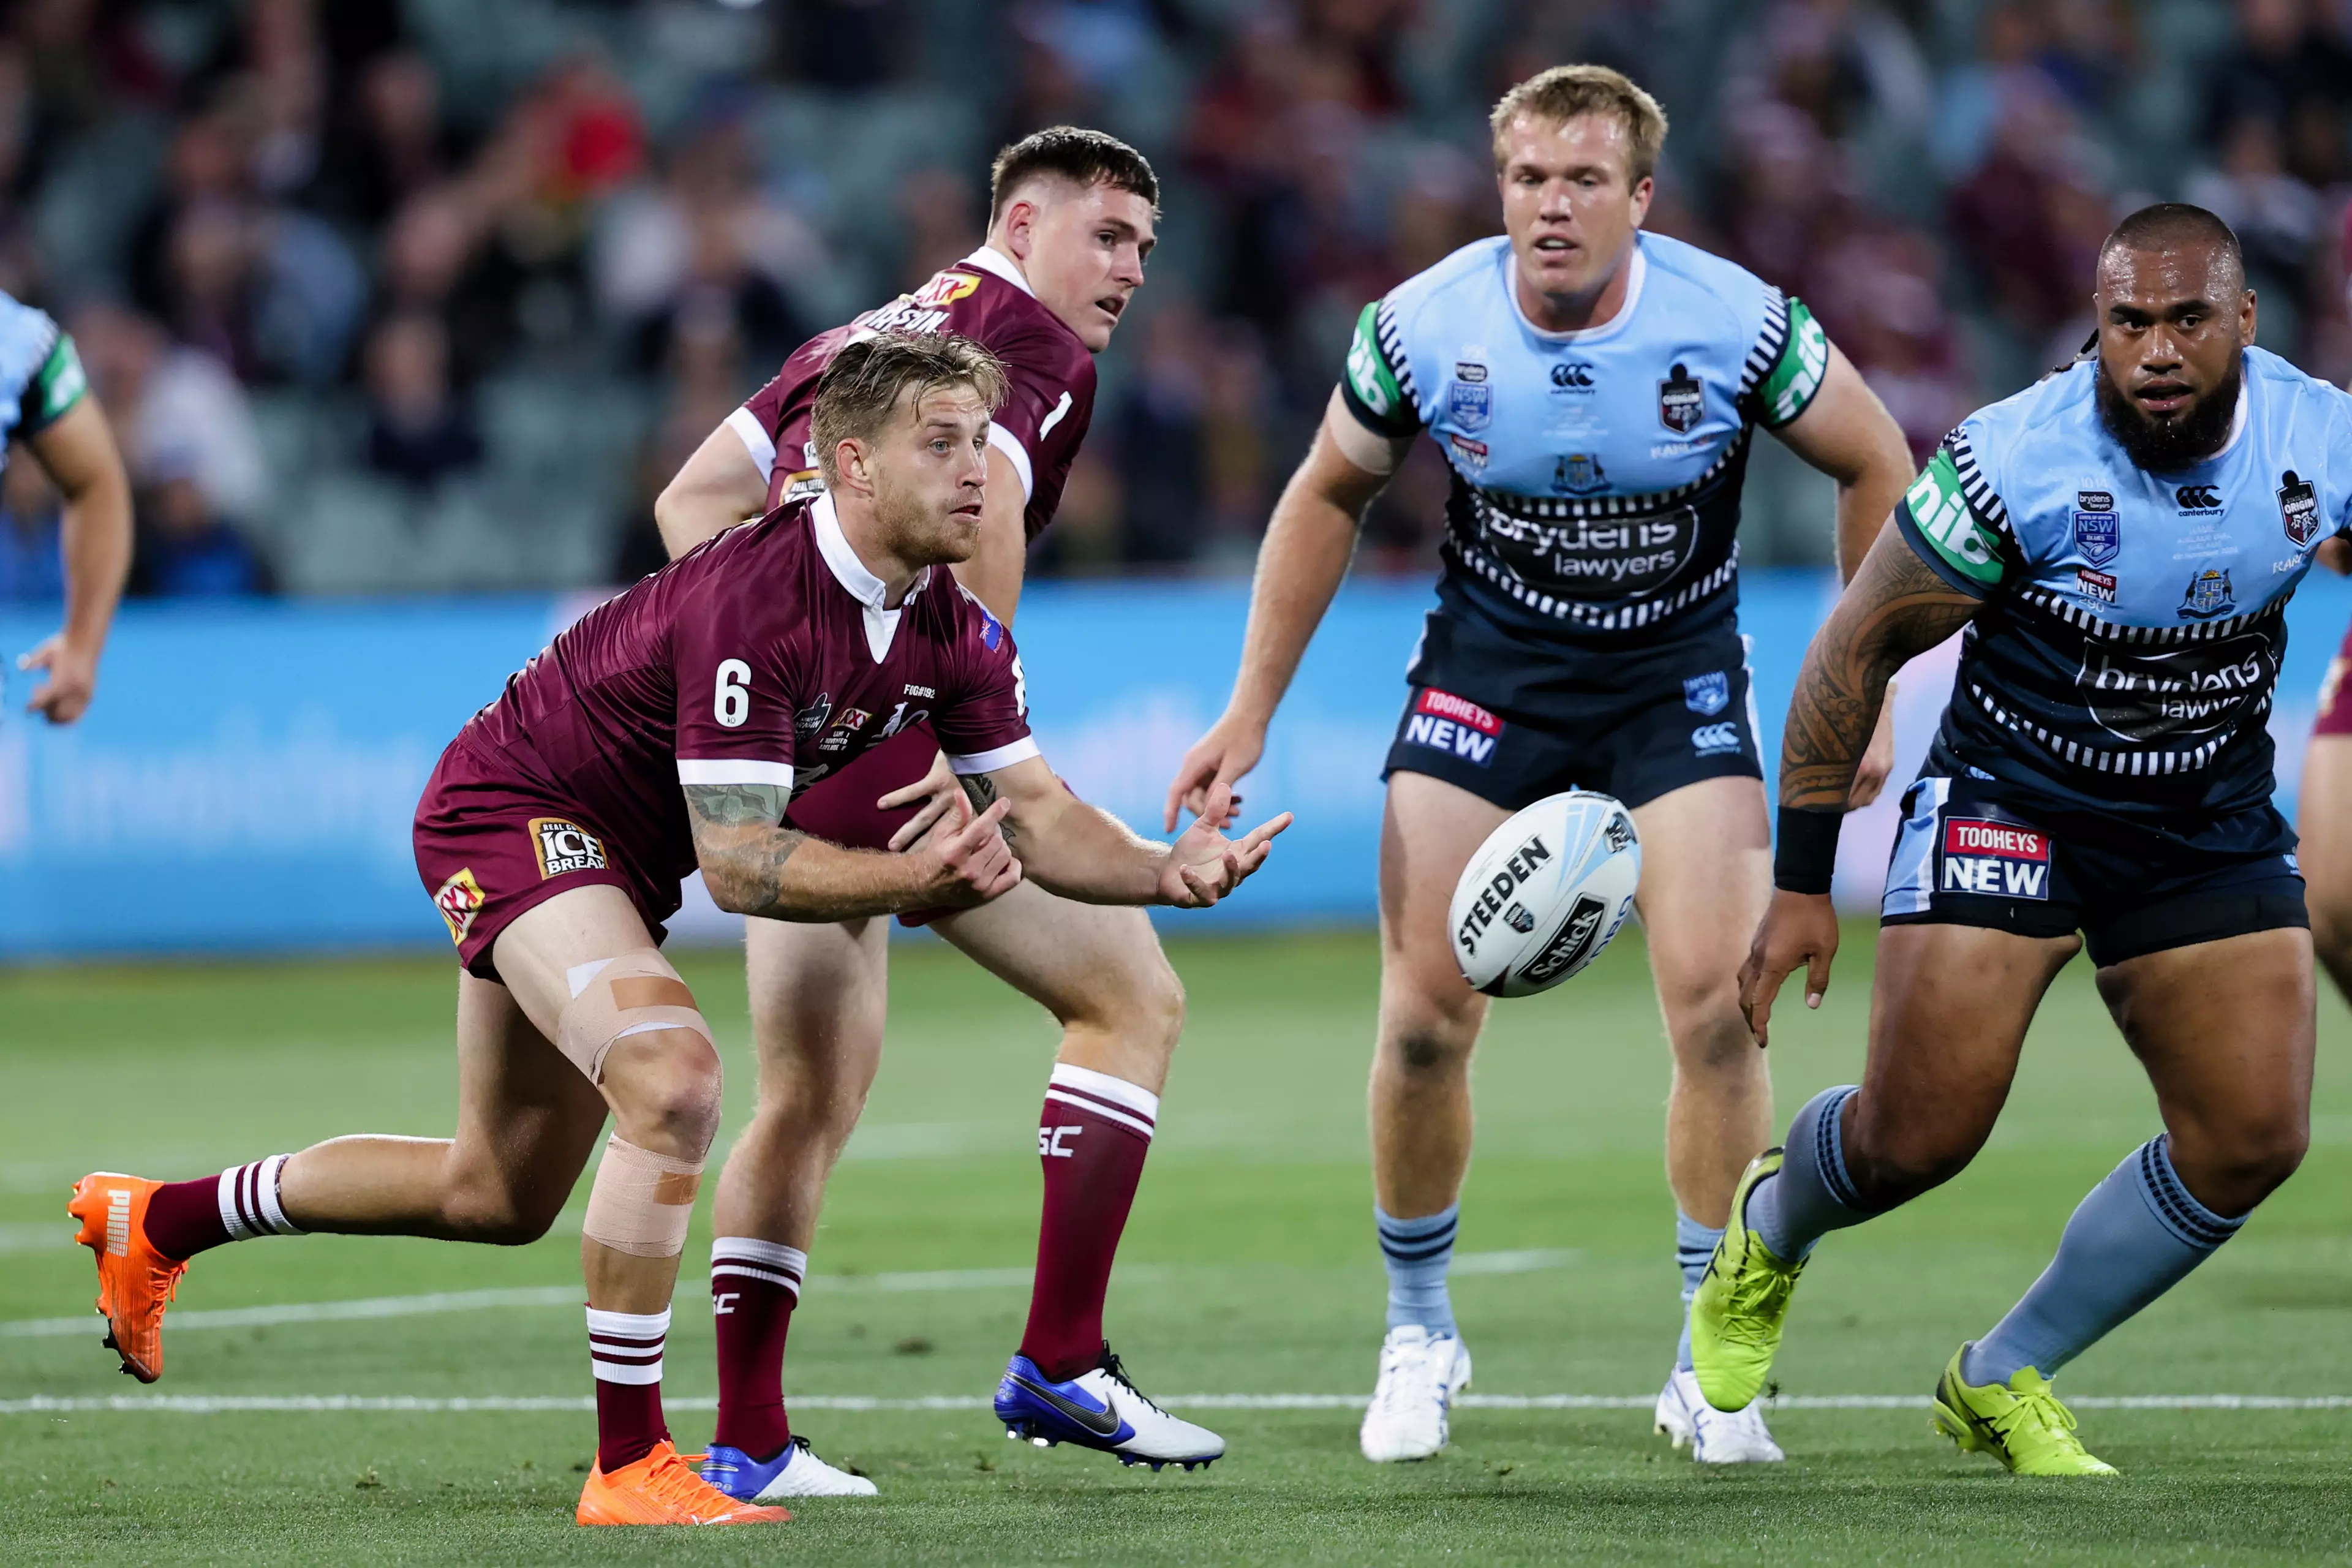 Can NSW exact revenge over QLD?